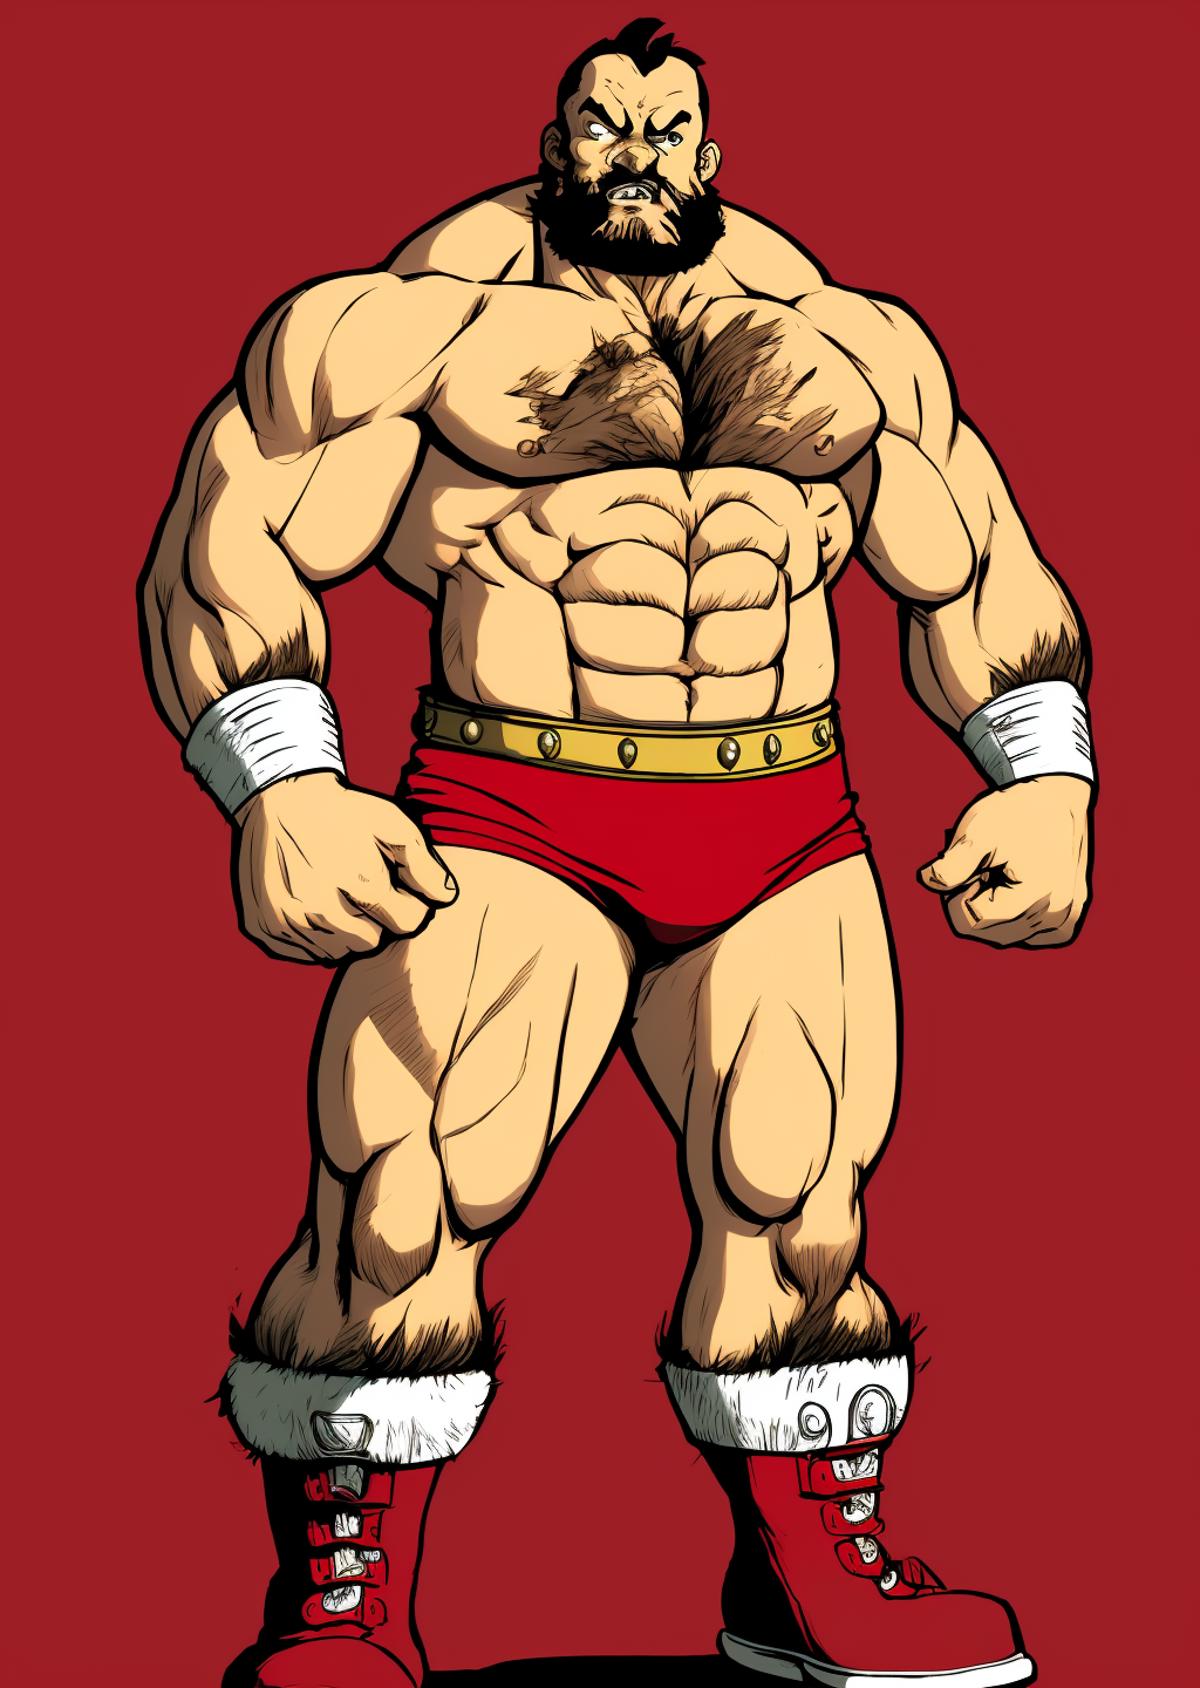 Zangief - Street Fighter Character image by Clumsy_Trainer